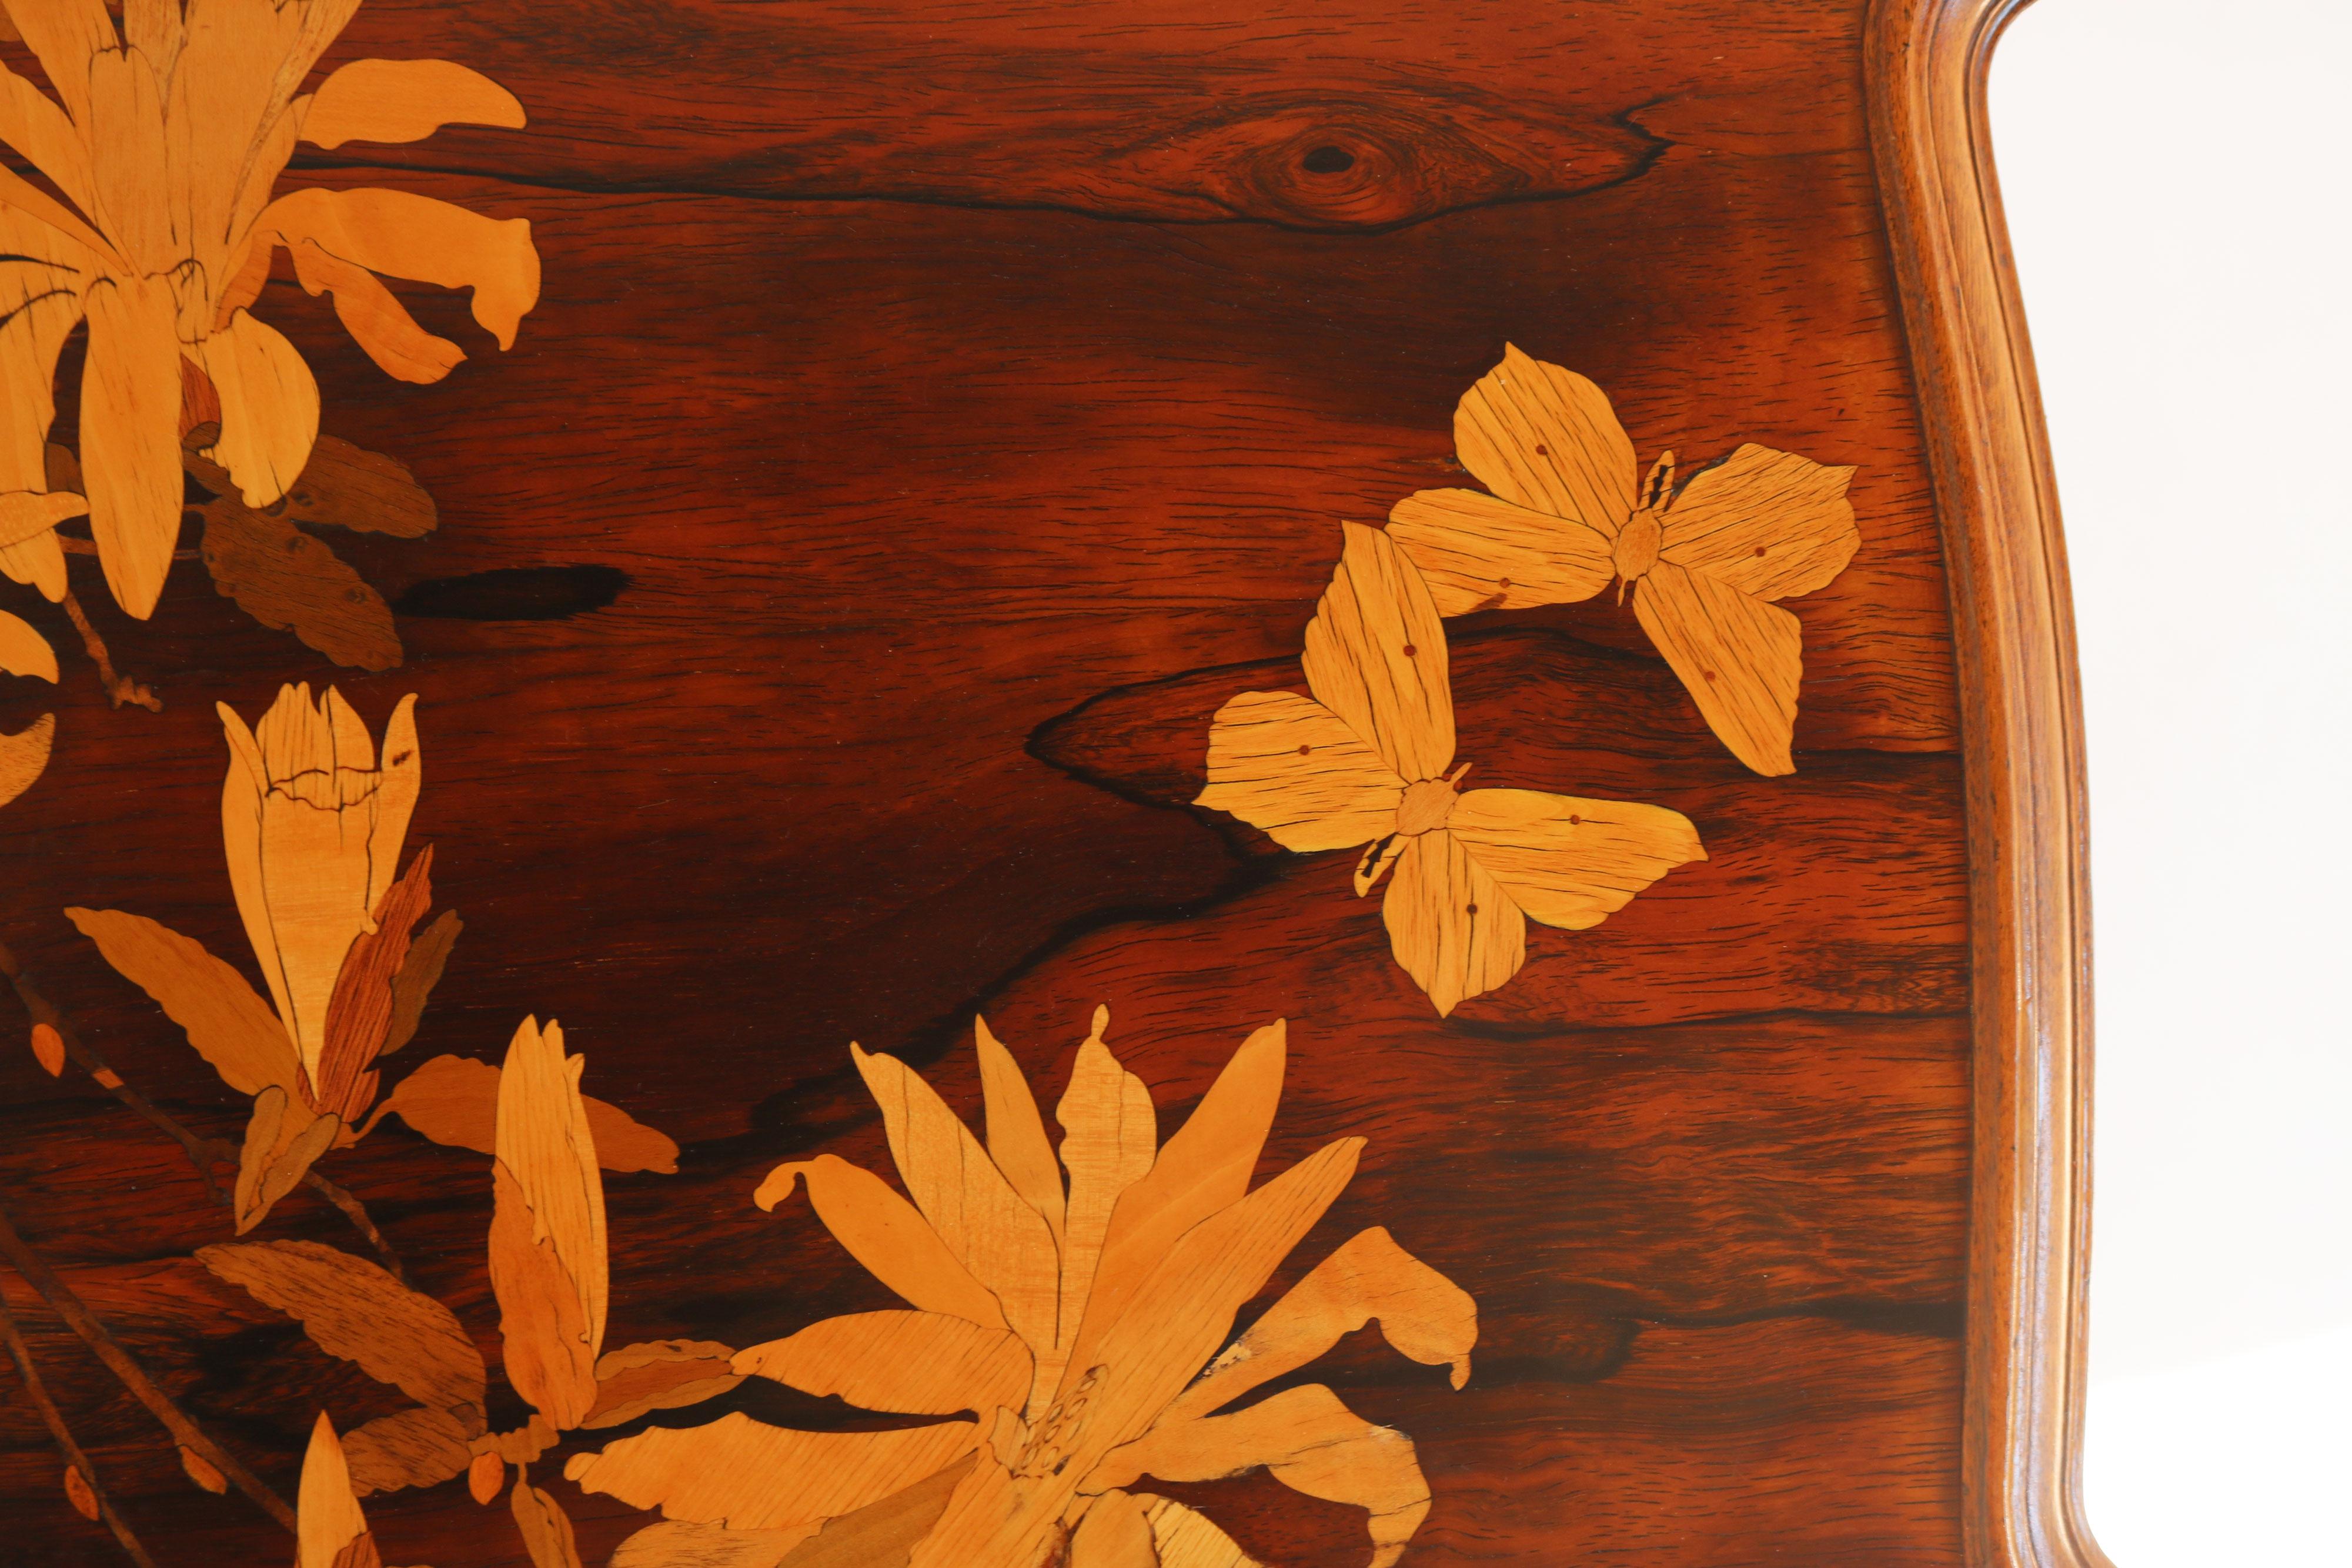 Original French Art Nouveau Marquetry Table ''Japonisme'' by Emile Galle 1900 In Good Condition For Sale In Ijzendijke, NL